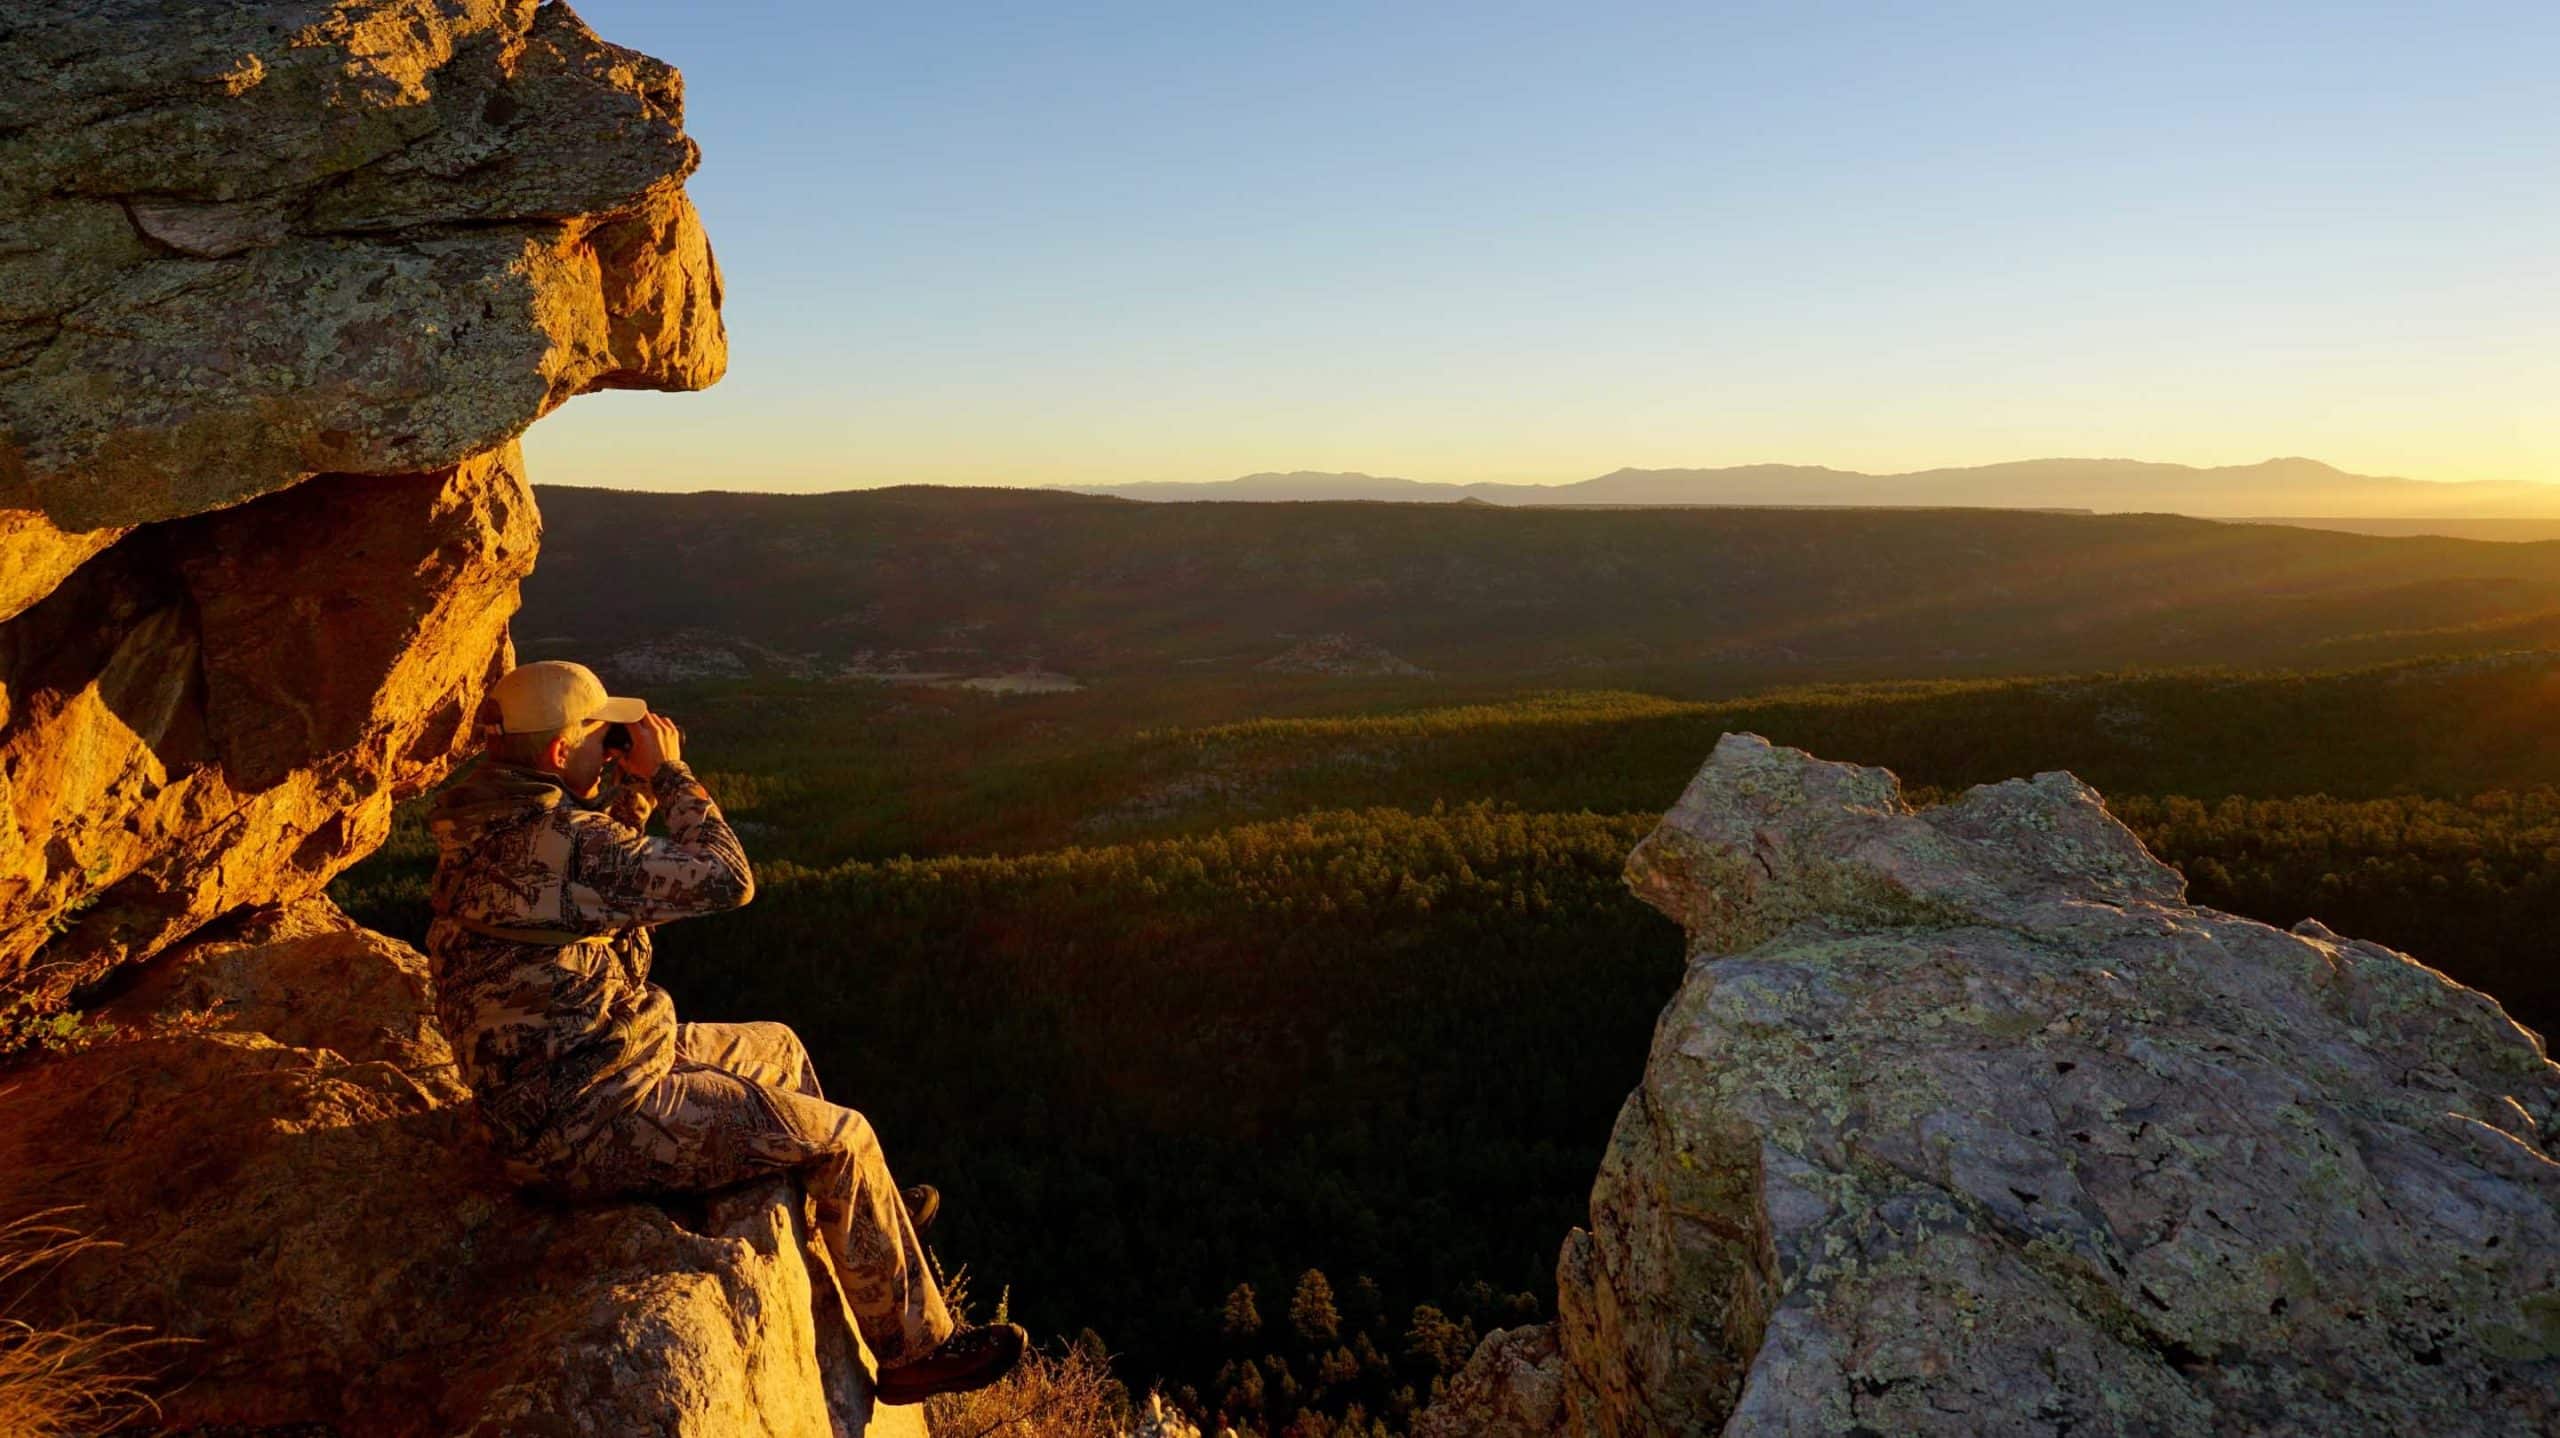 Image of hunter watching the sunset from a rocky mountainside in public lands.